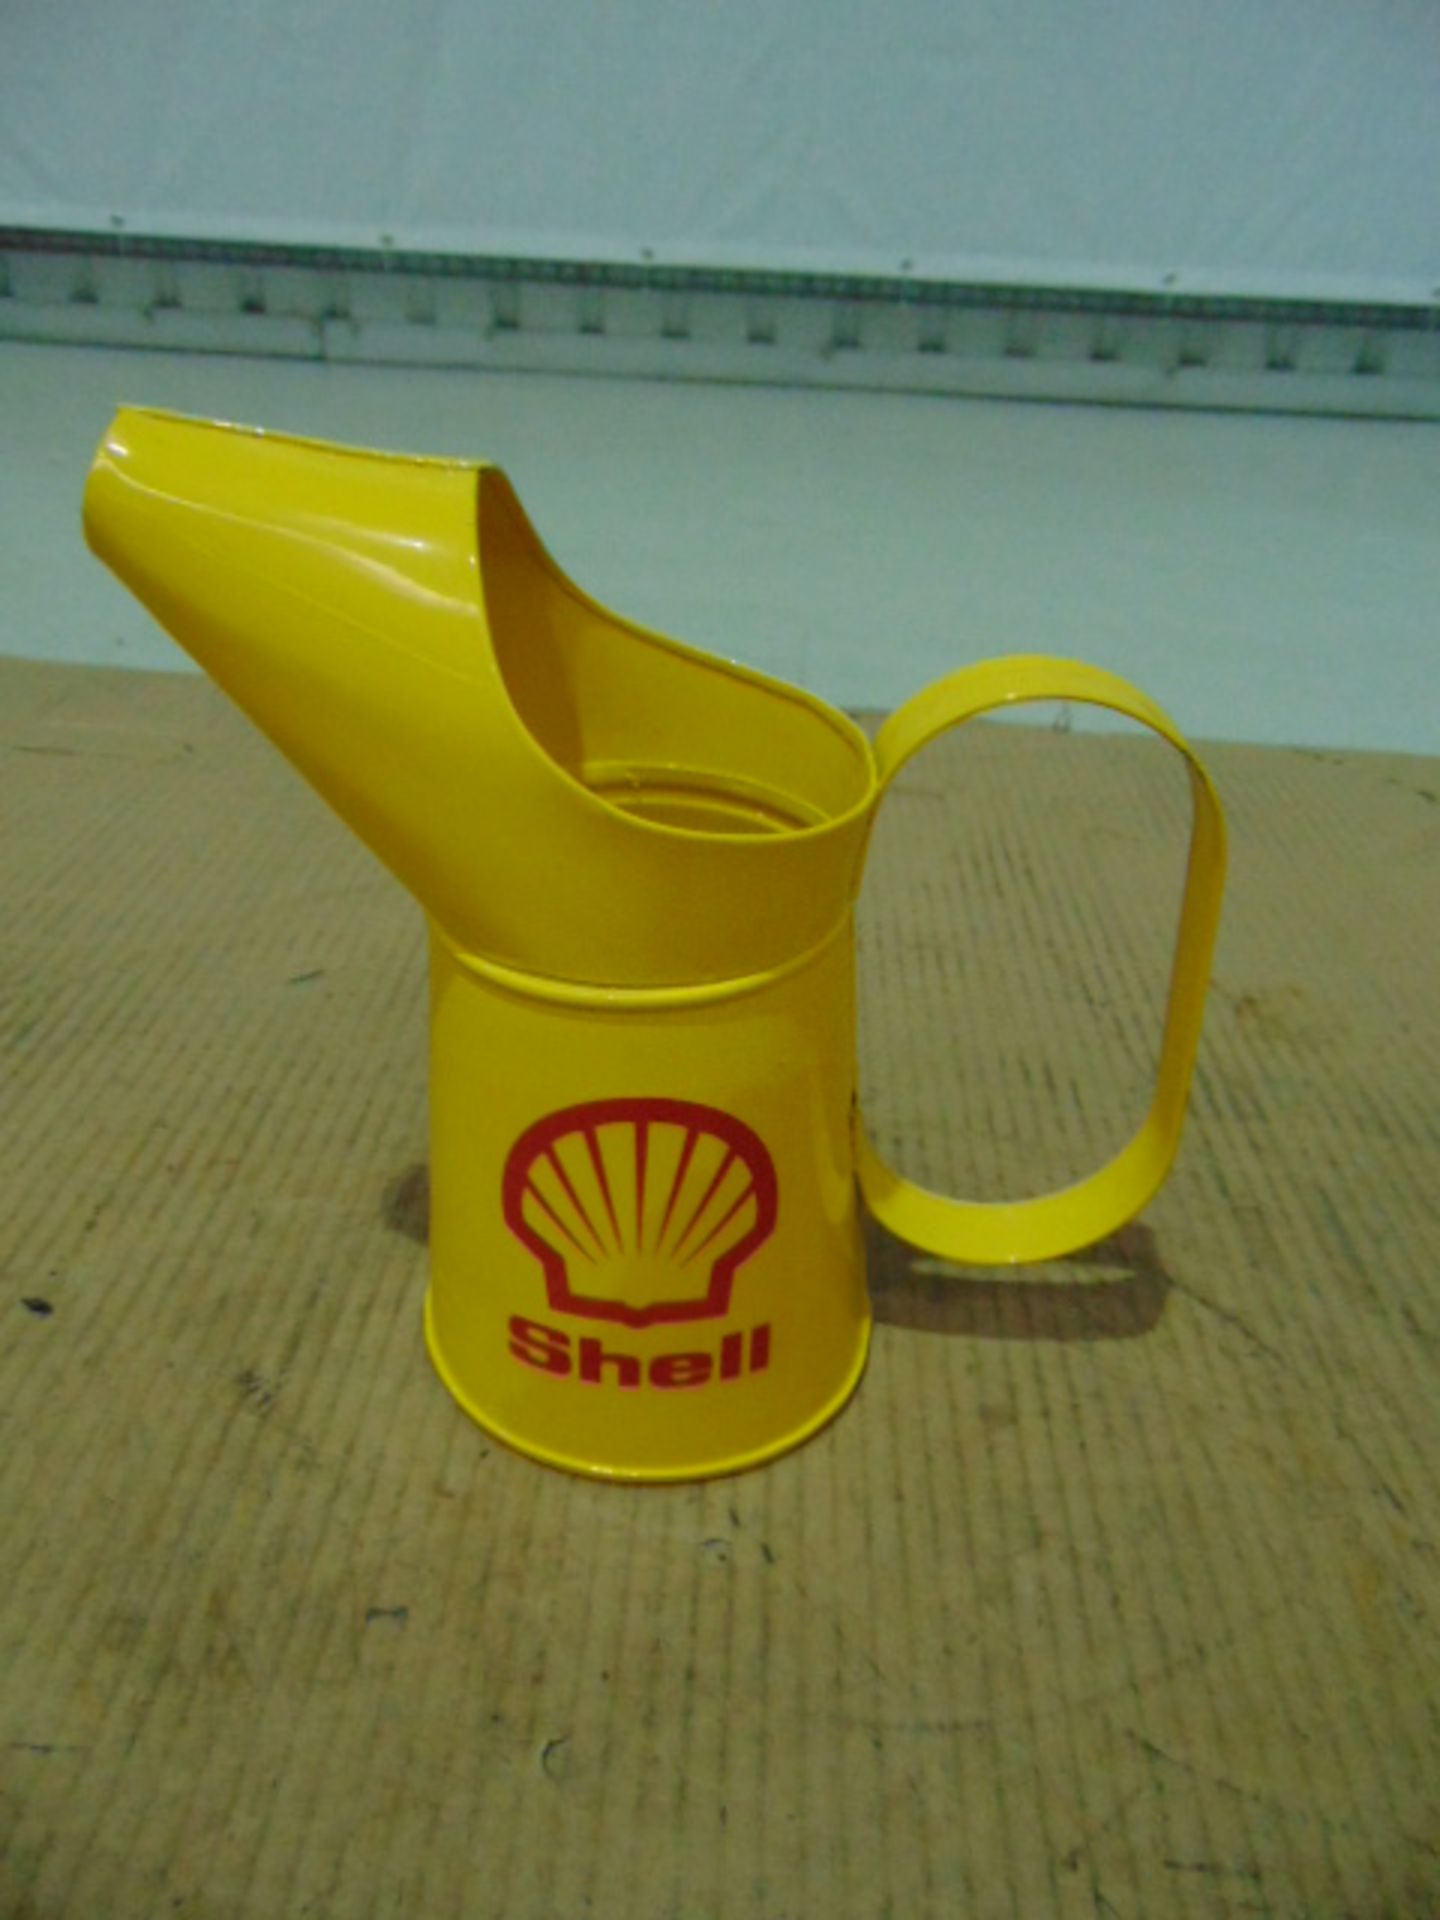 Set of 5 x Shell Branded Mixed Size Oil Pourer Cans - Bild 4 aus 8